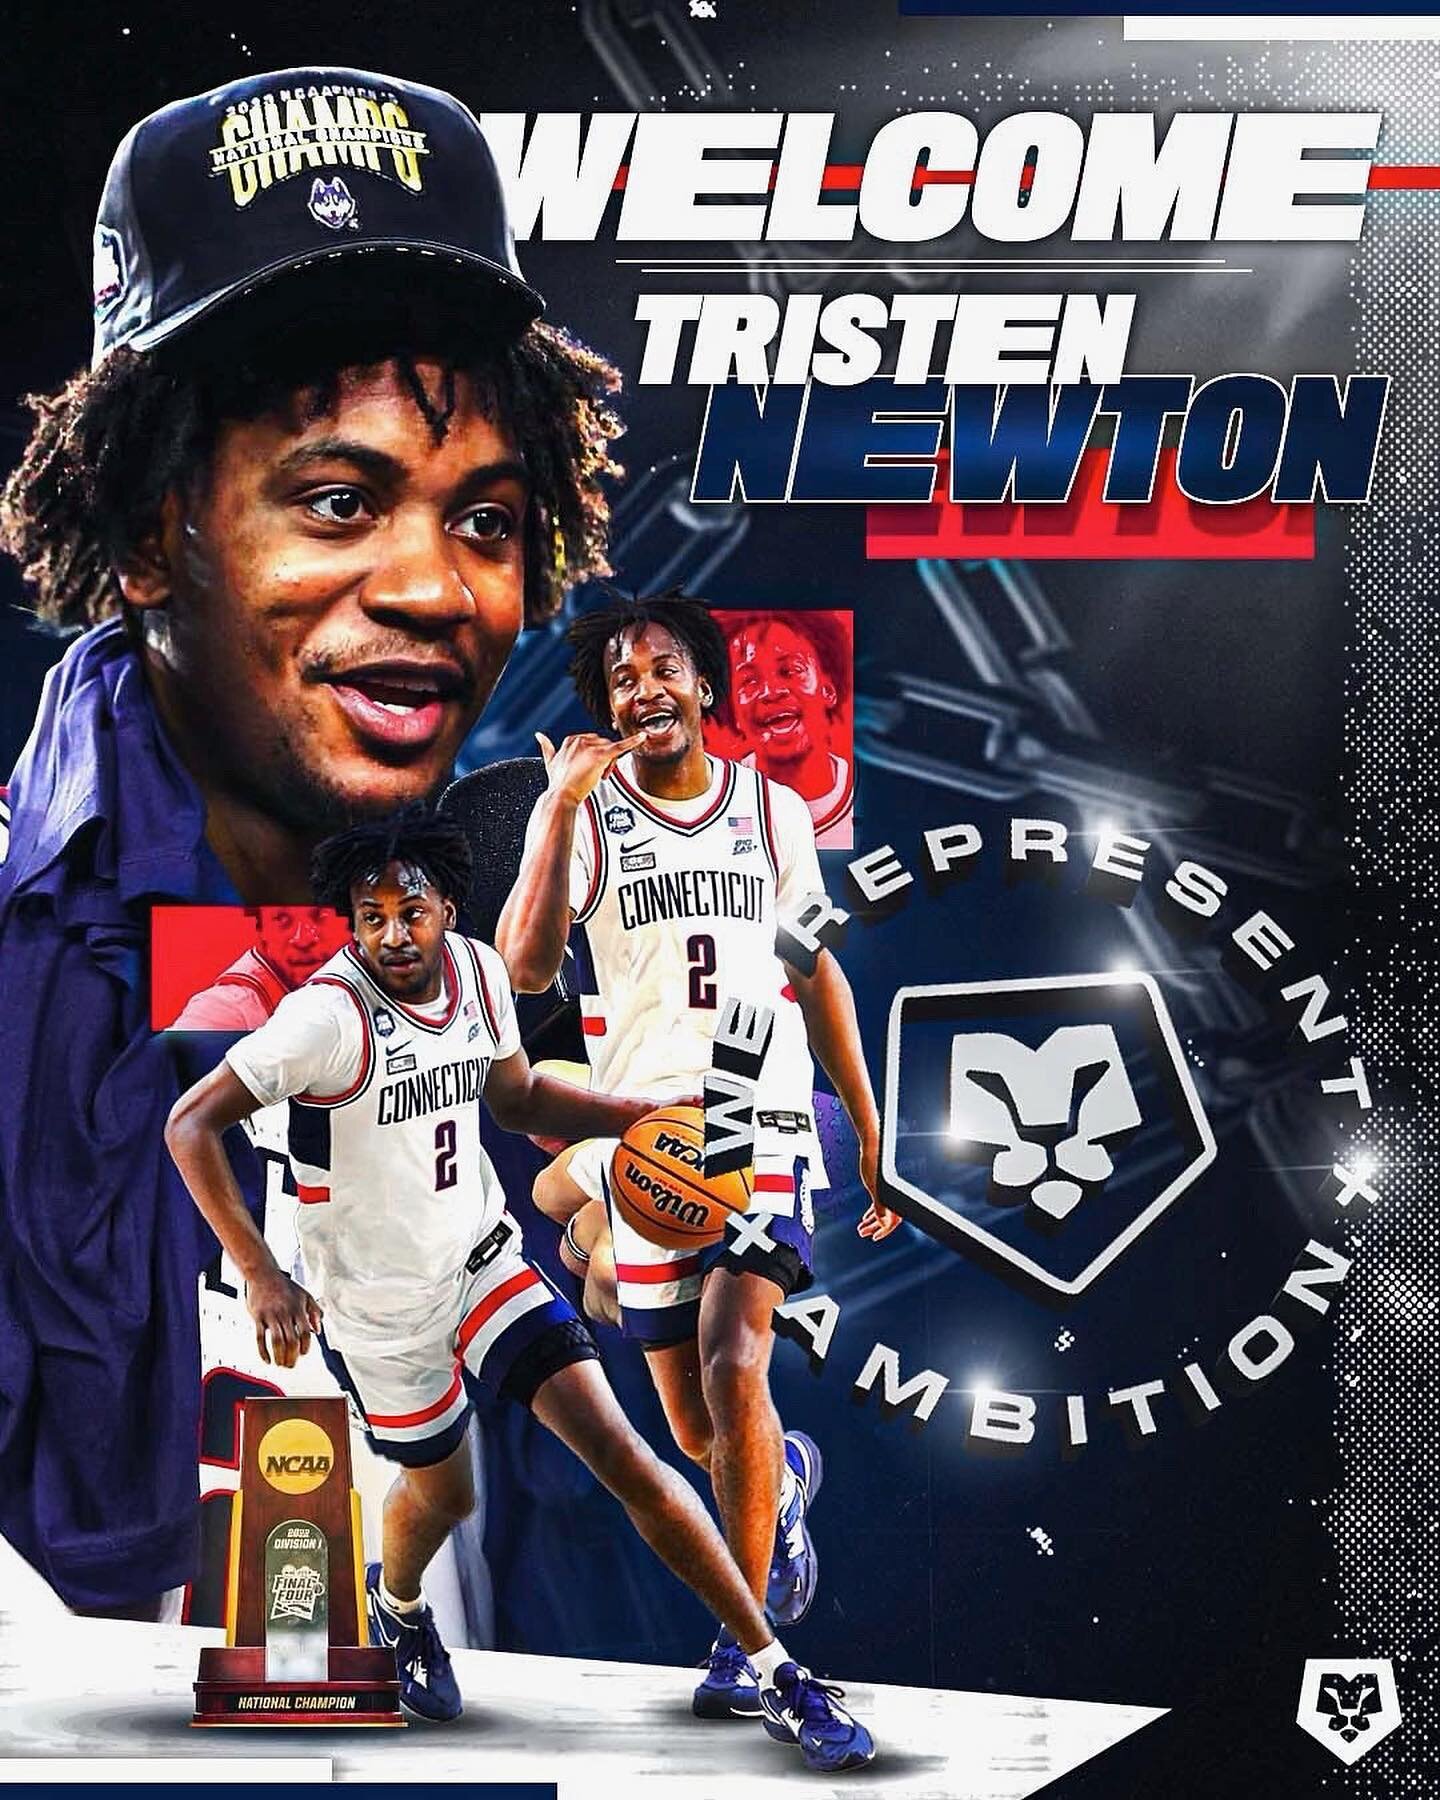 Excited to welcome @d1tristen to the MSG Family!

#WeRepresentAmbition